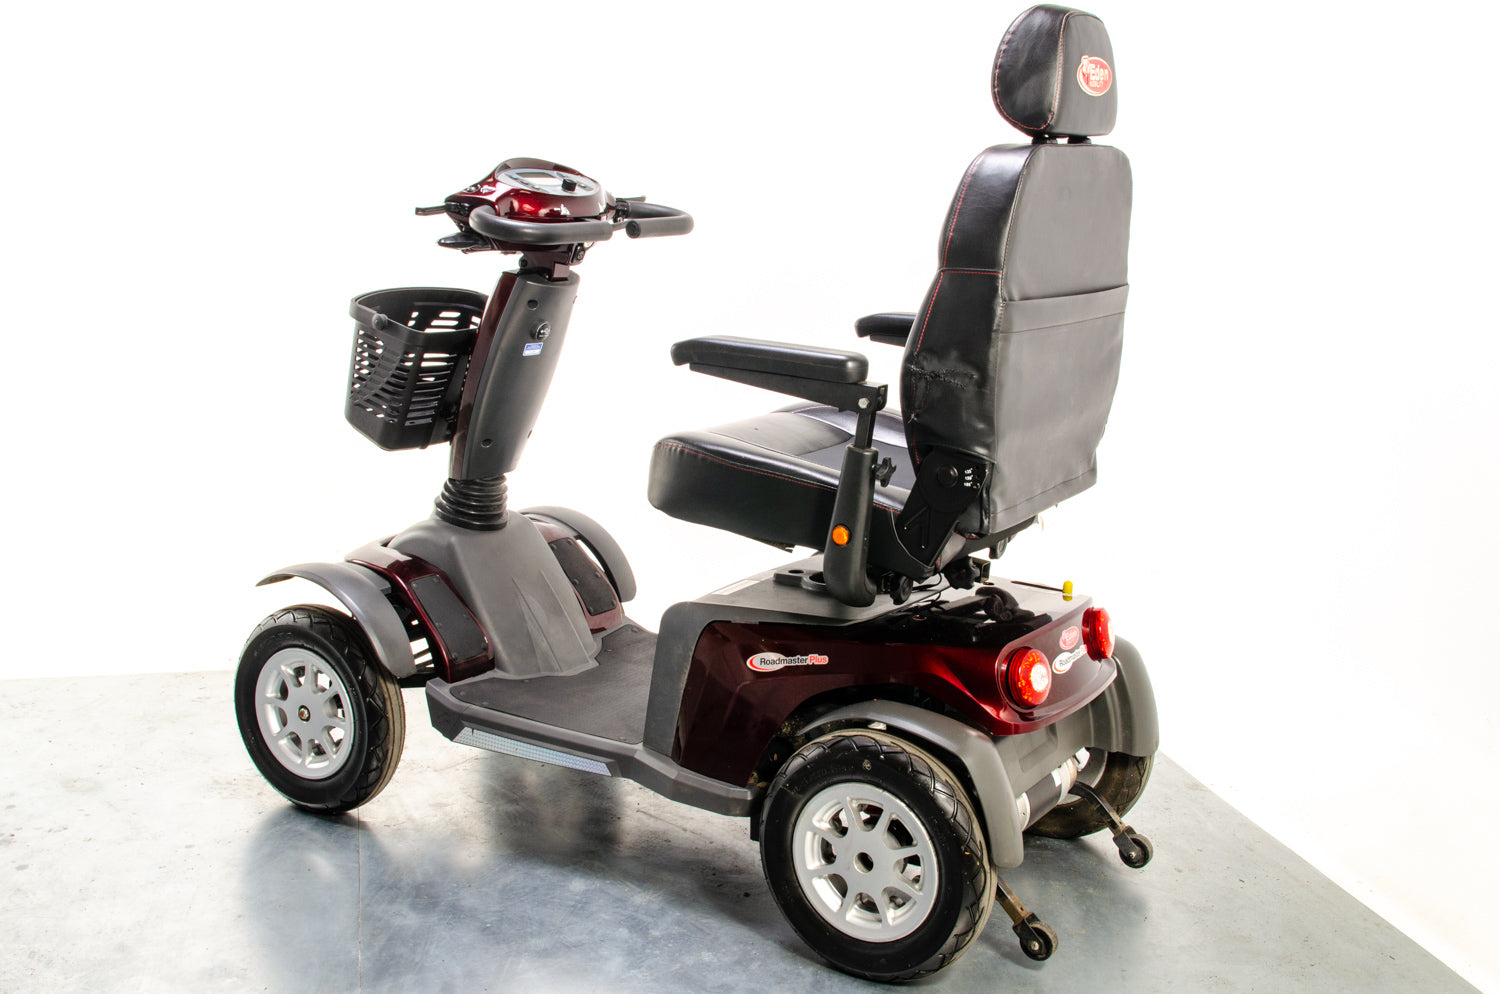 2020 Eden Roadmaster Plus Used Mobility Scooter 8mph Large All Terrain Luxury Electric 13285